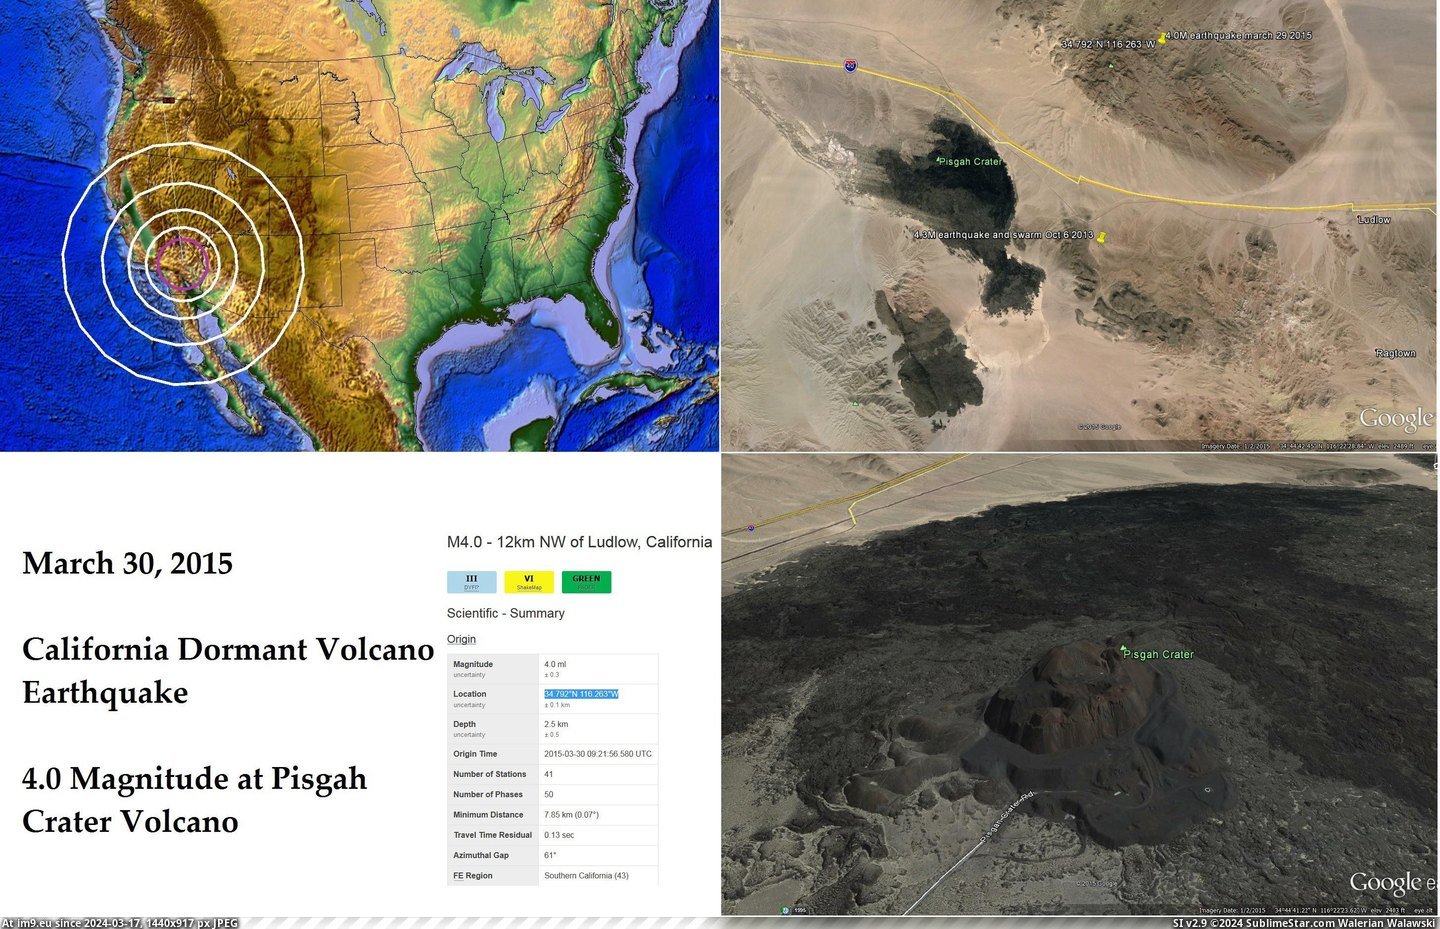 #Crater #Earthquake #March 4.0m-earthquake-pisgah-crater-march-30-2015 Pic. (Image of album Alternative-News.tk))